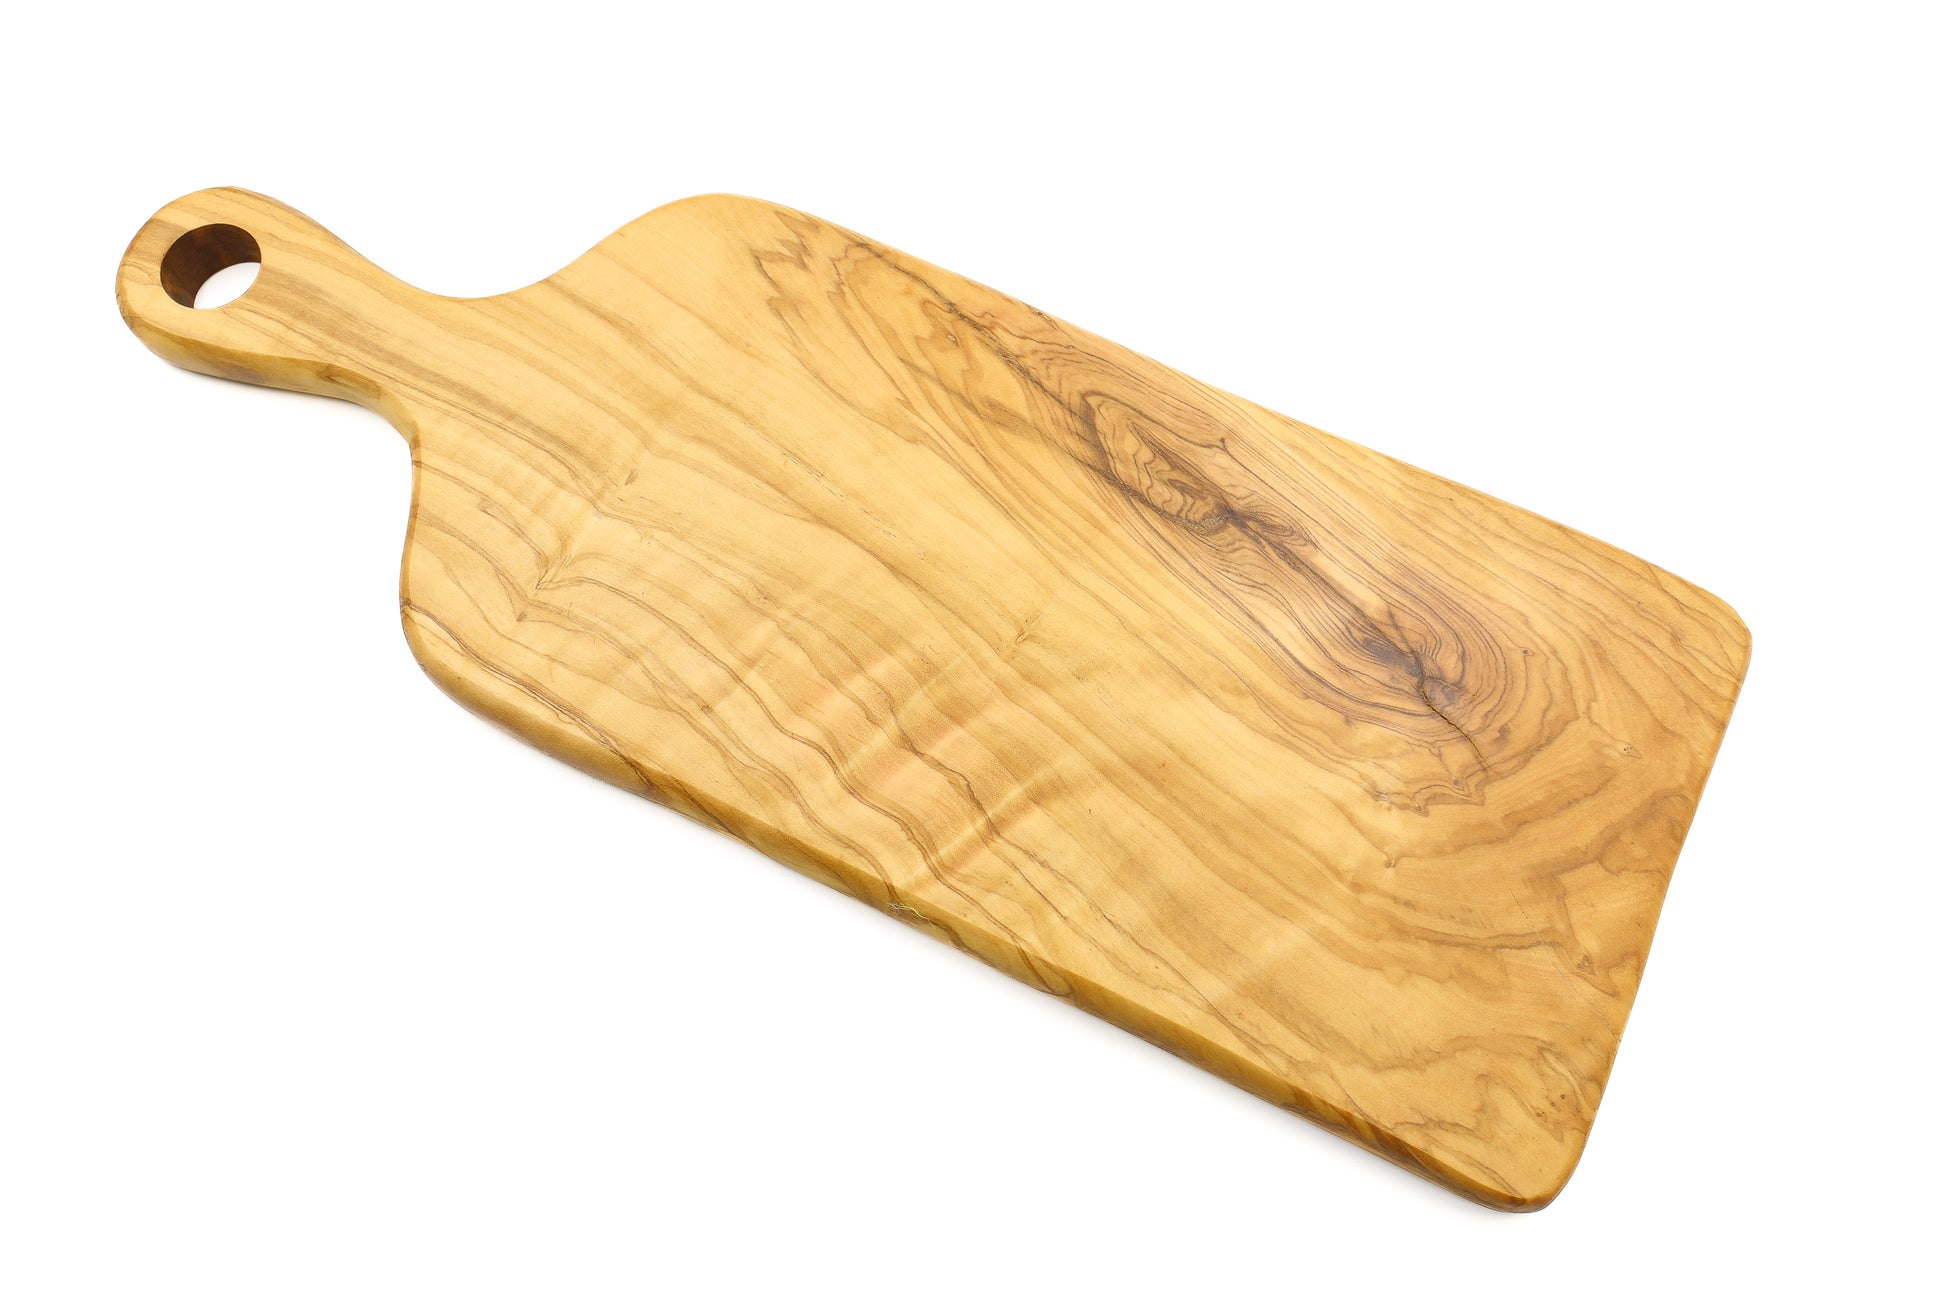 Olive wood chopping board in a classic paddle shape, featuring a handle